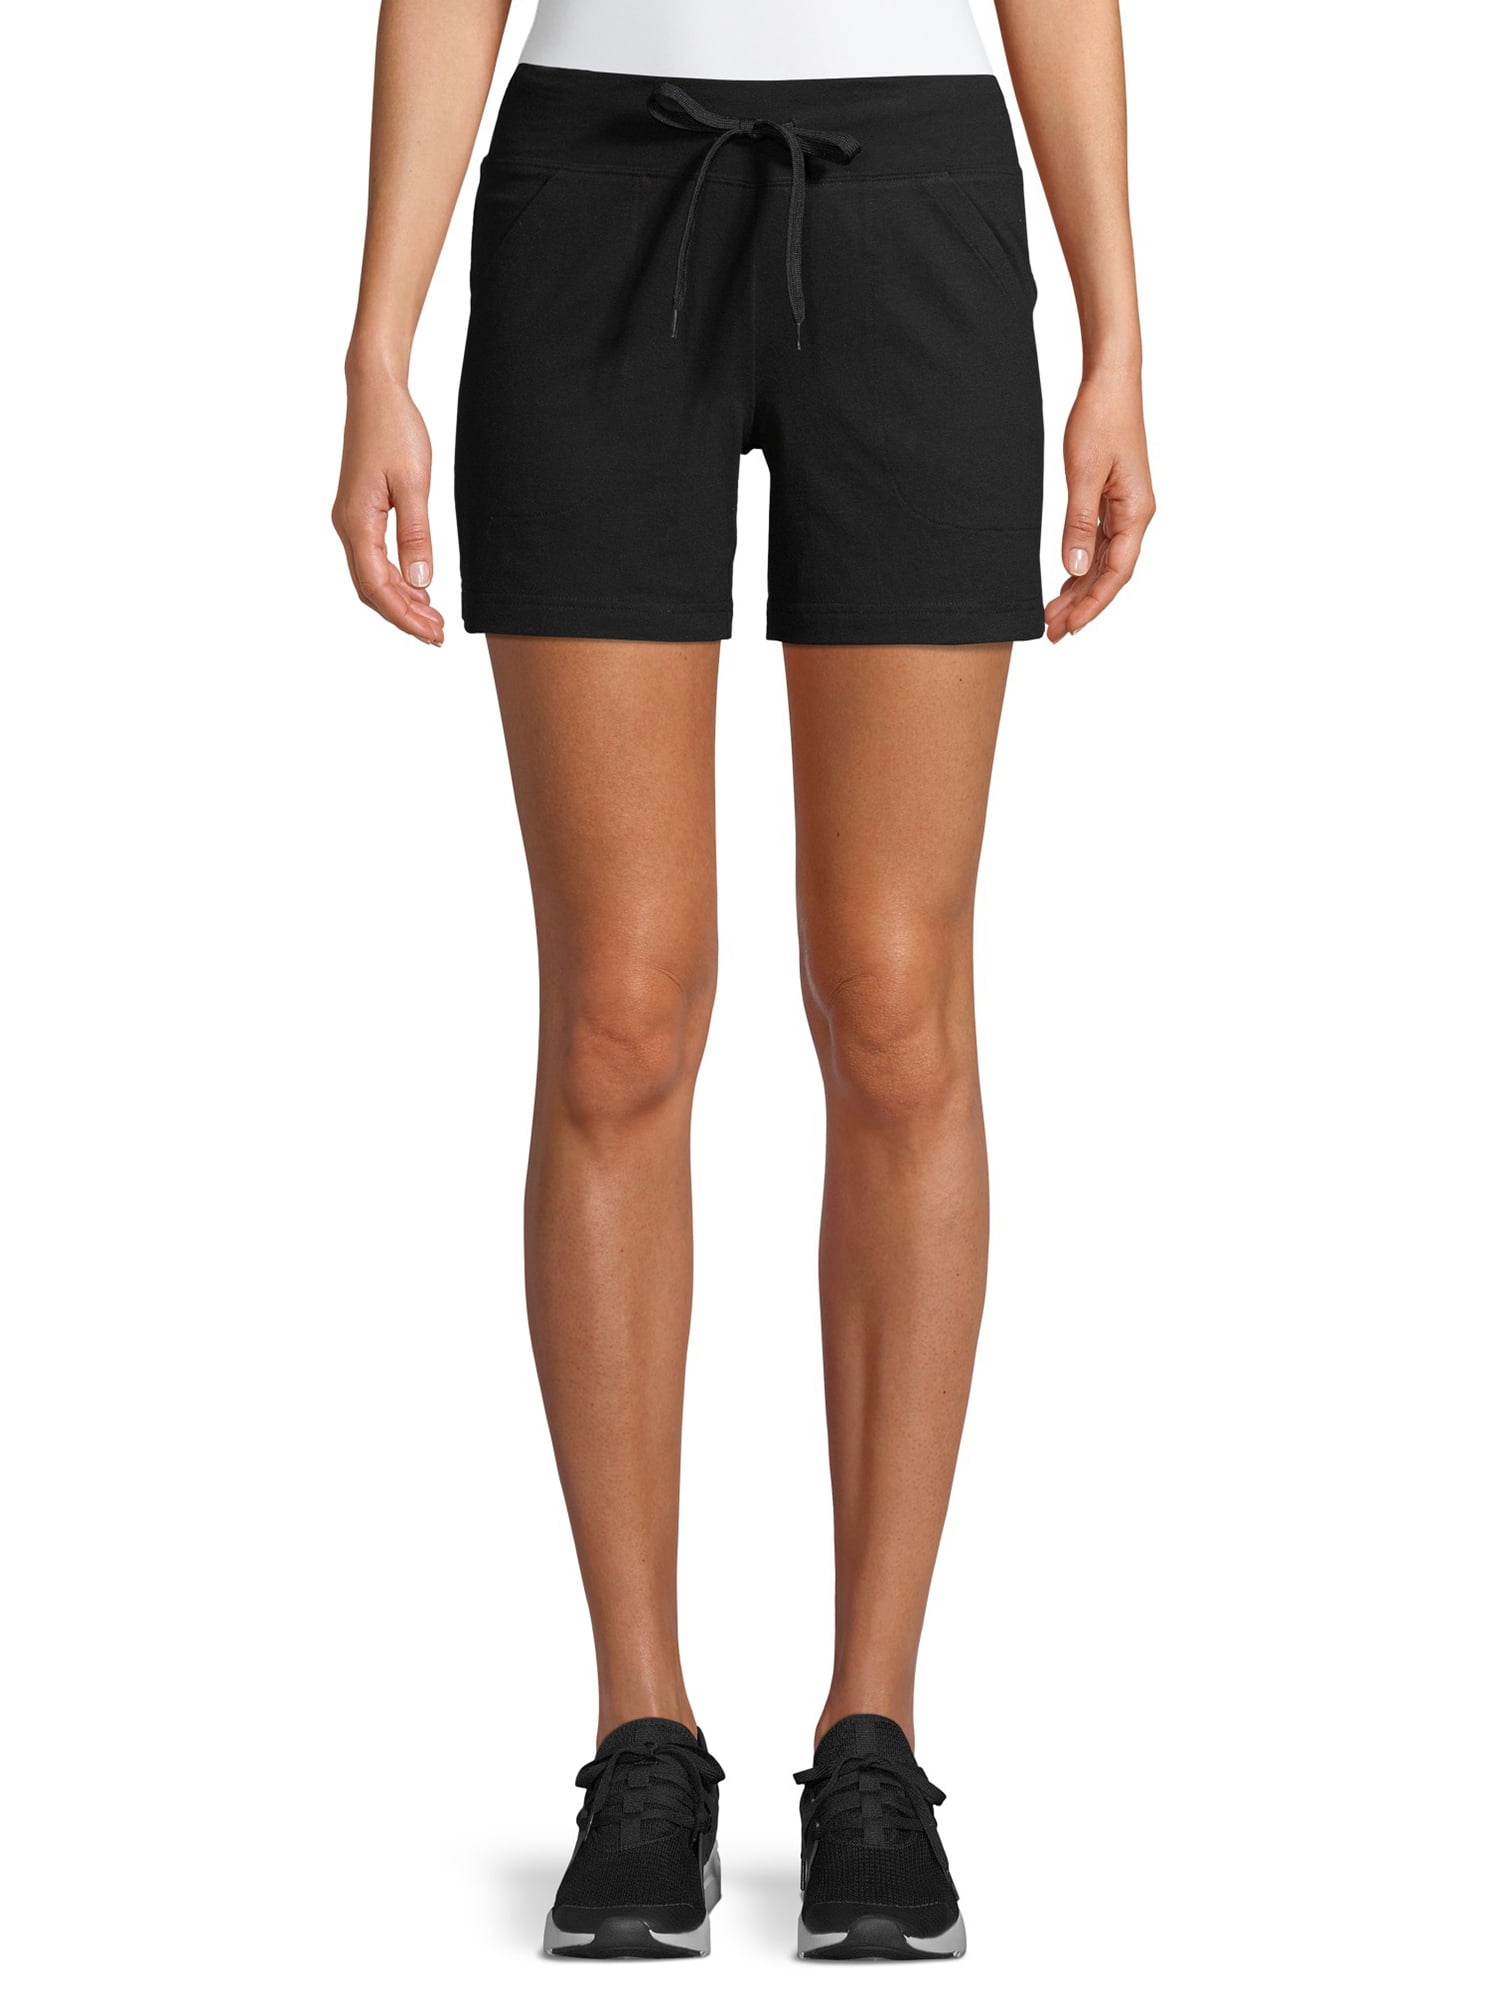 Athletic Works Women's Athleisure 5